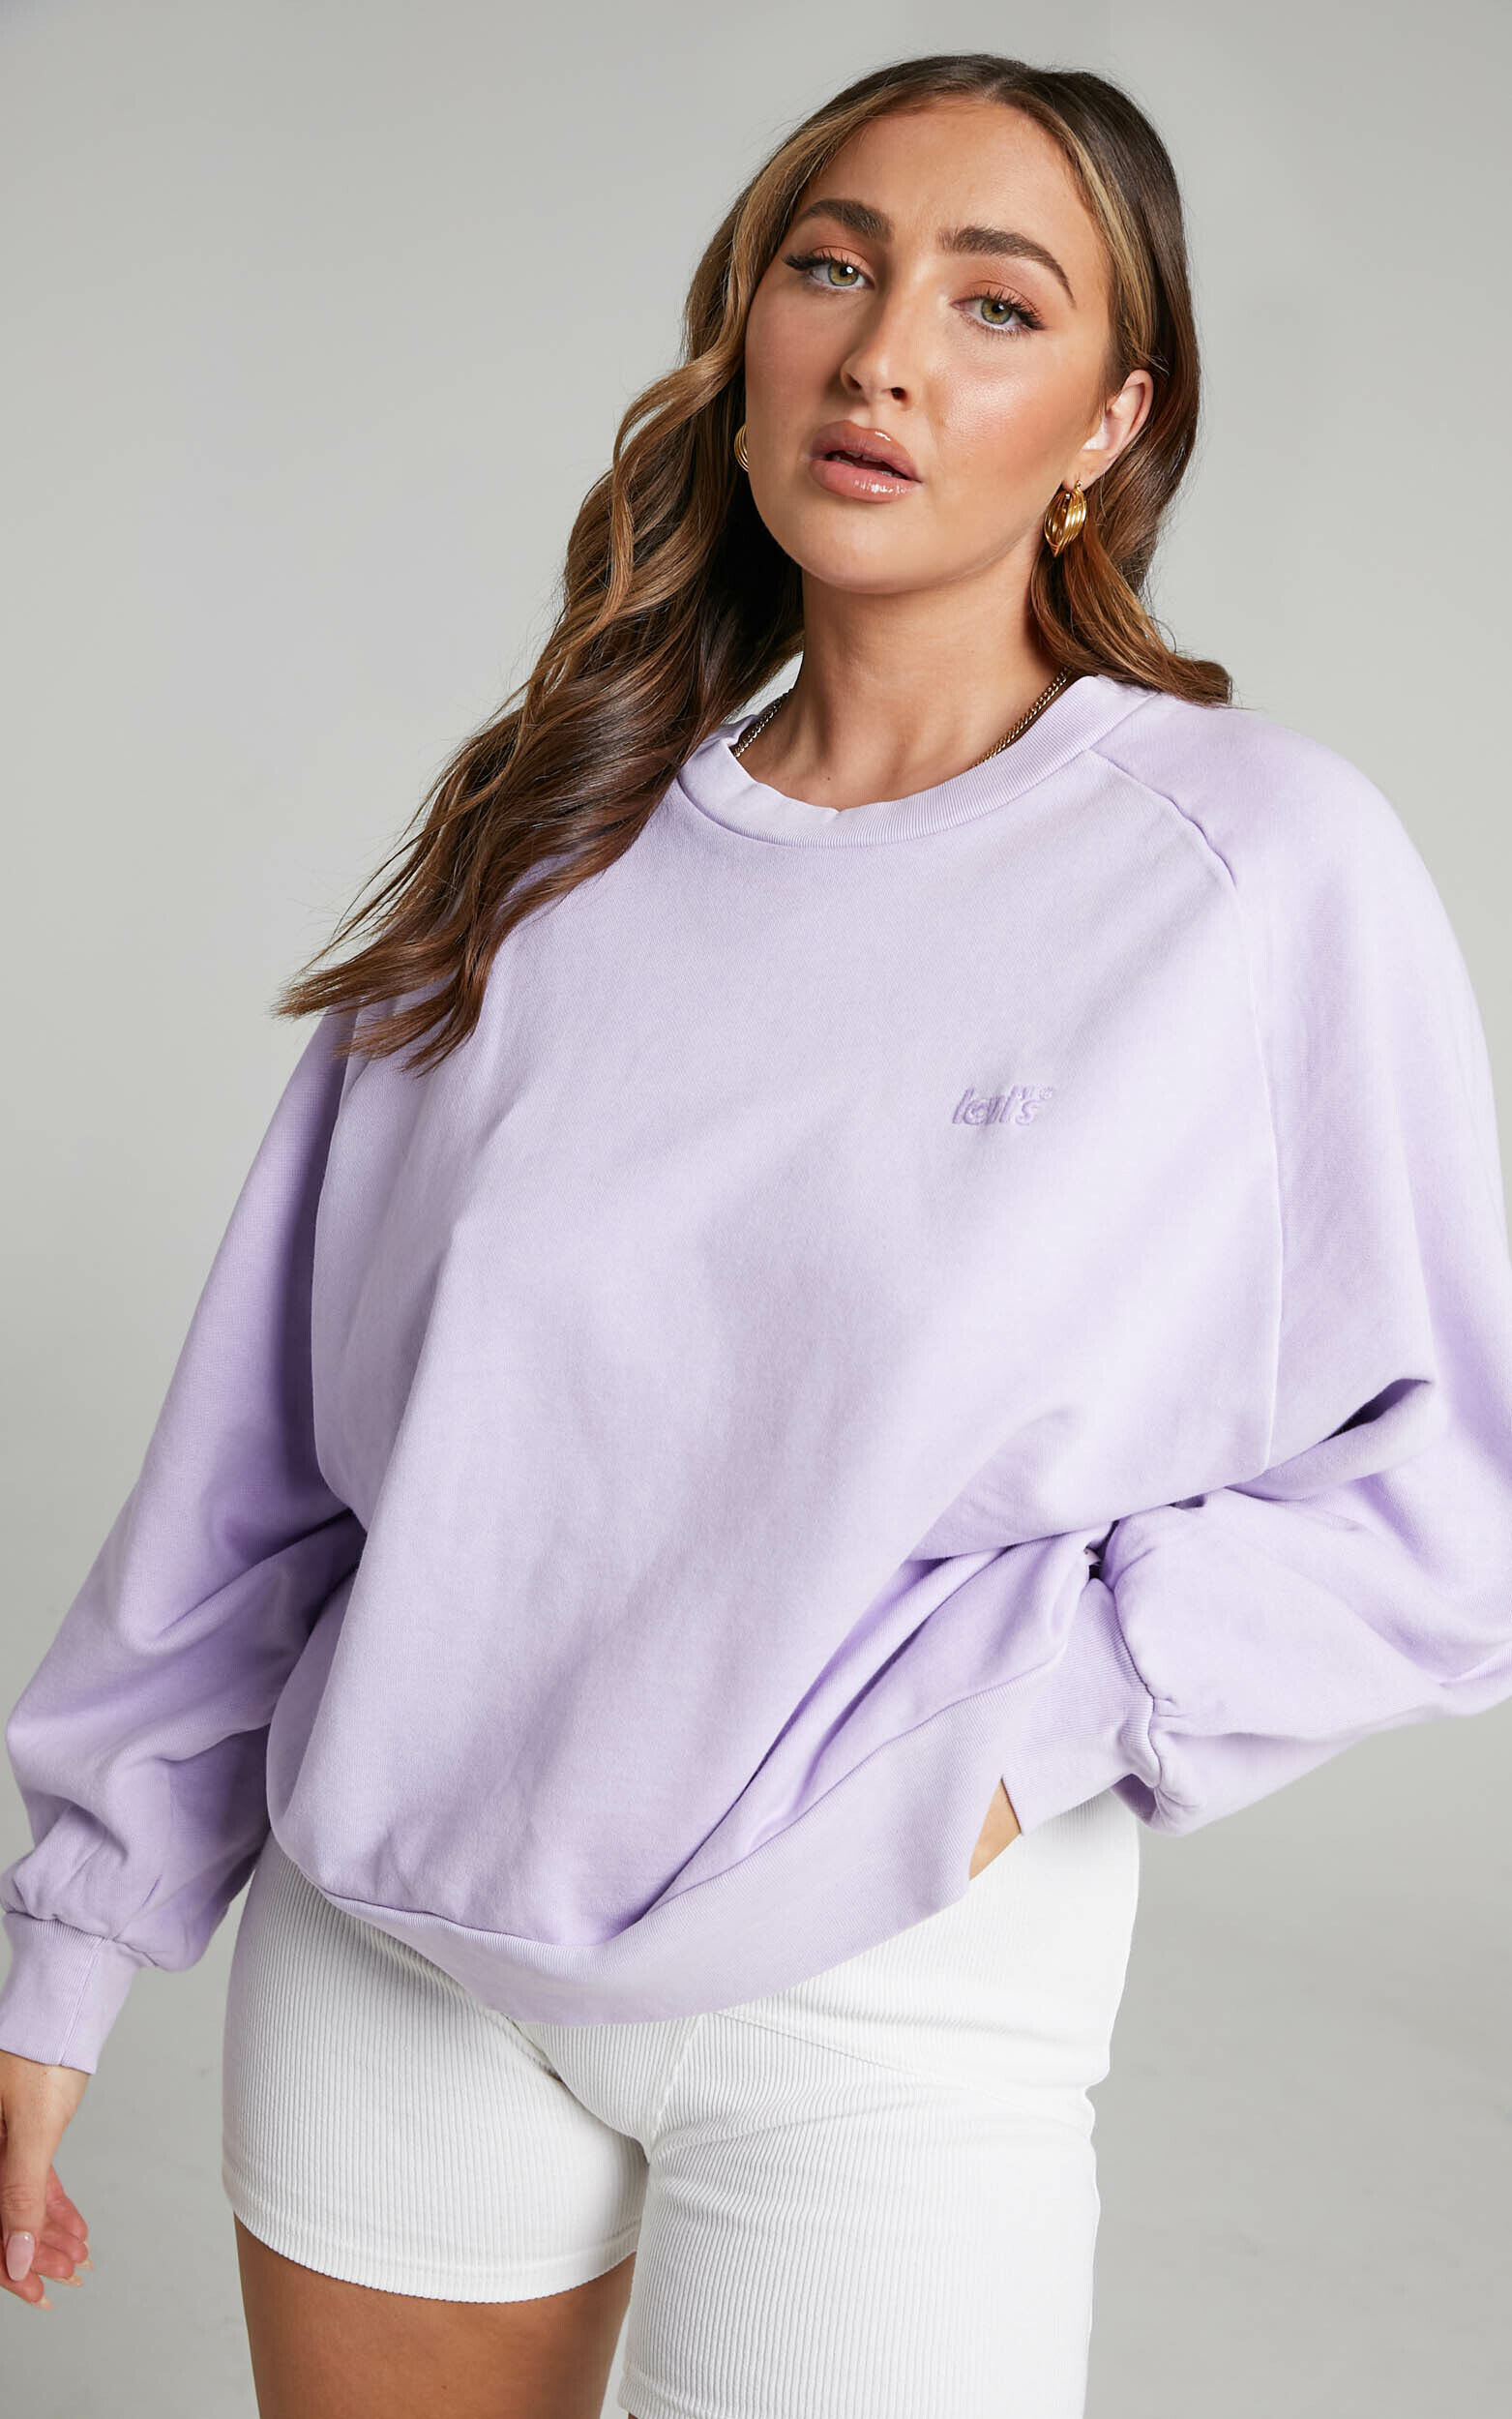 Levi's - Natural Dye Snack Sweatshirt in Mid Saturated Purple - L, PRP1